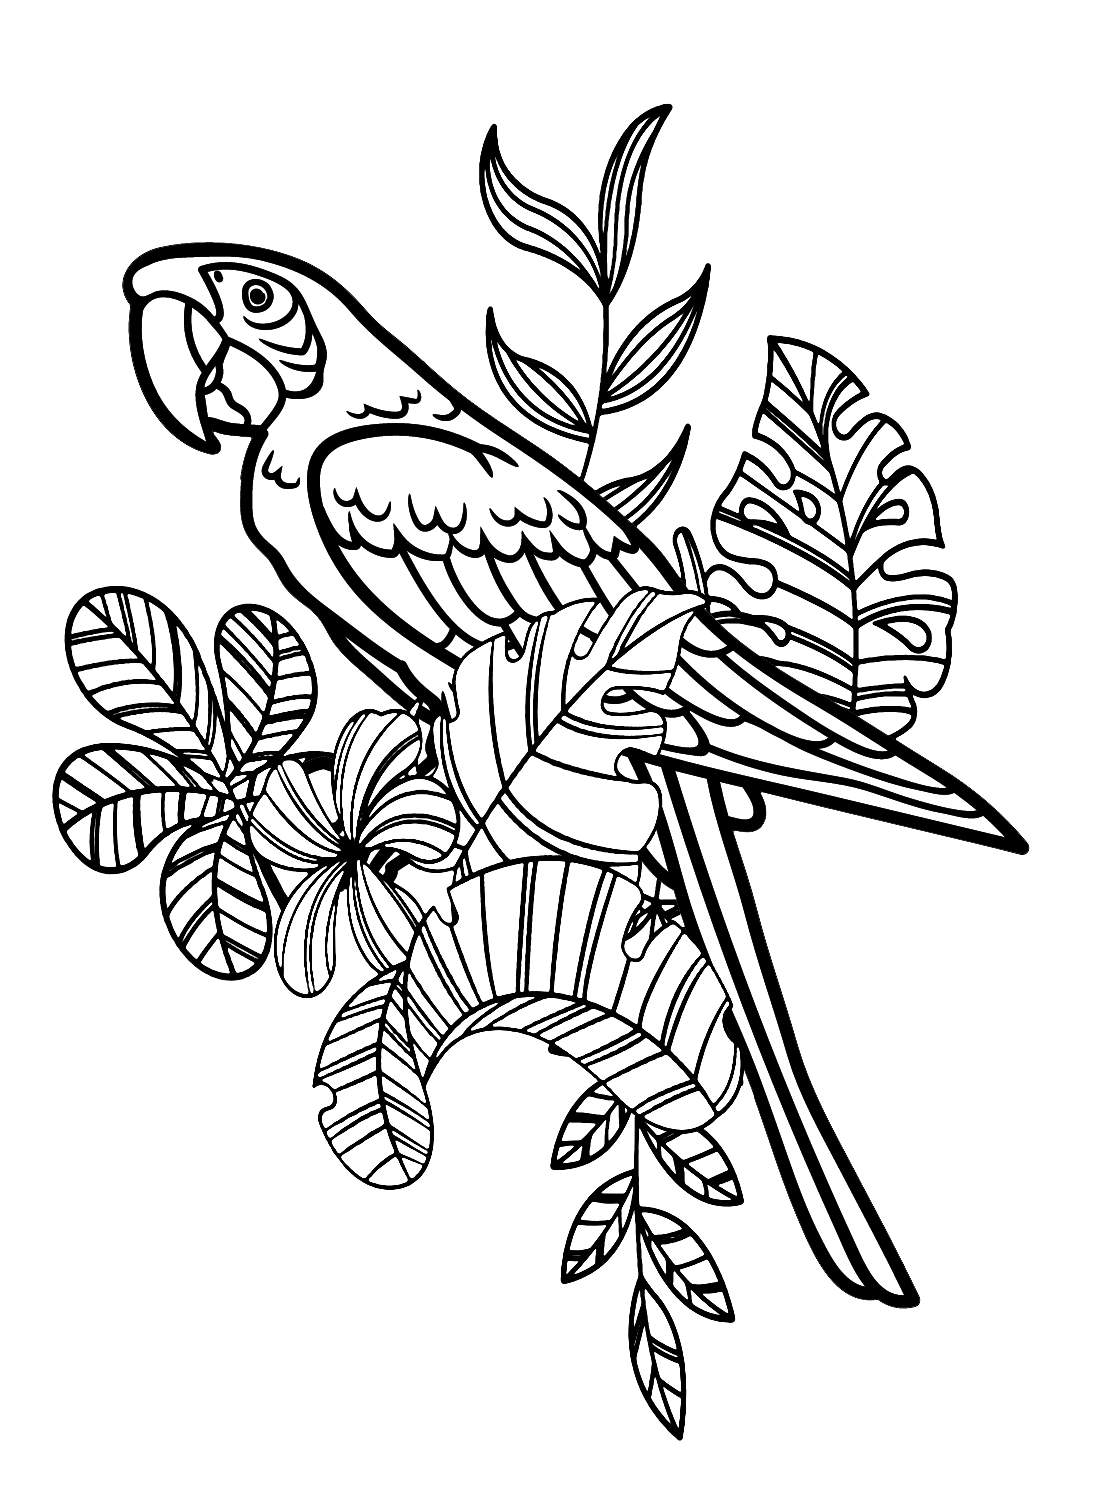 Macaw with Tropical Leaves from Macaw